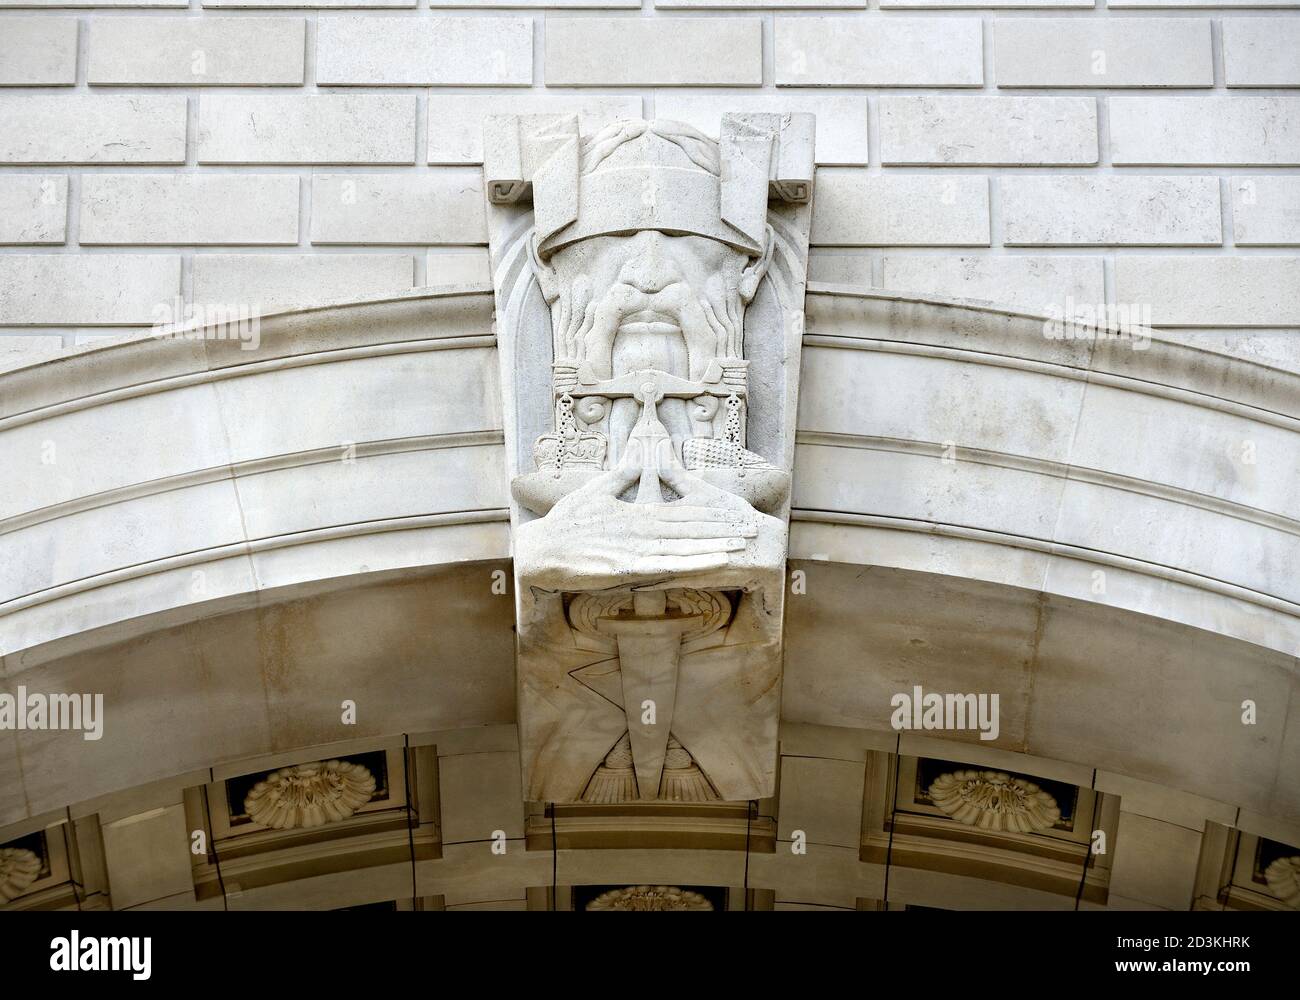 London, England, UK. Thames House,  2 Millbank (1930. HQ of MI5 since 1994) Decorative keystone and arch. Blindfolded man with a sword and scales... Stock Photo